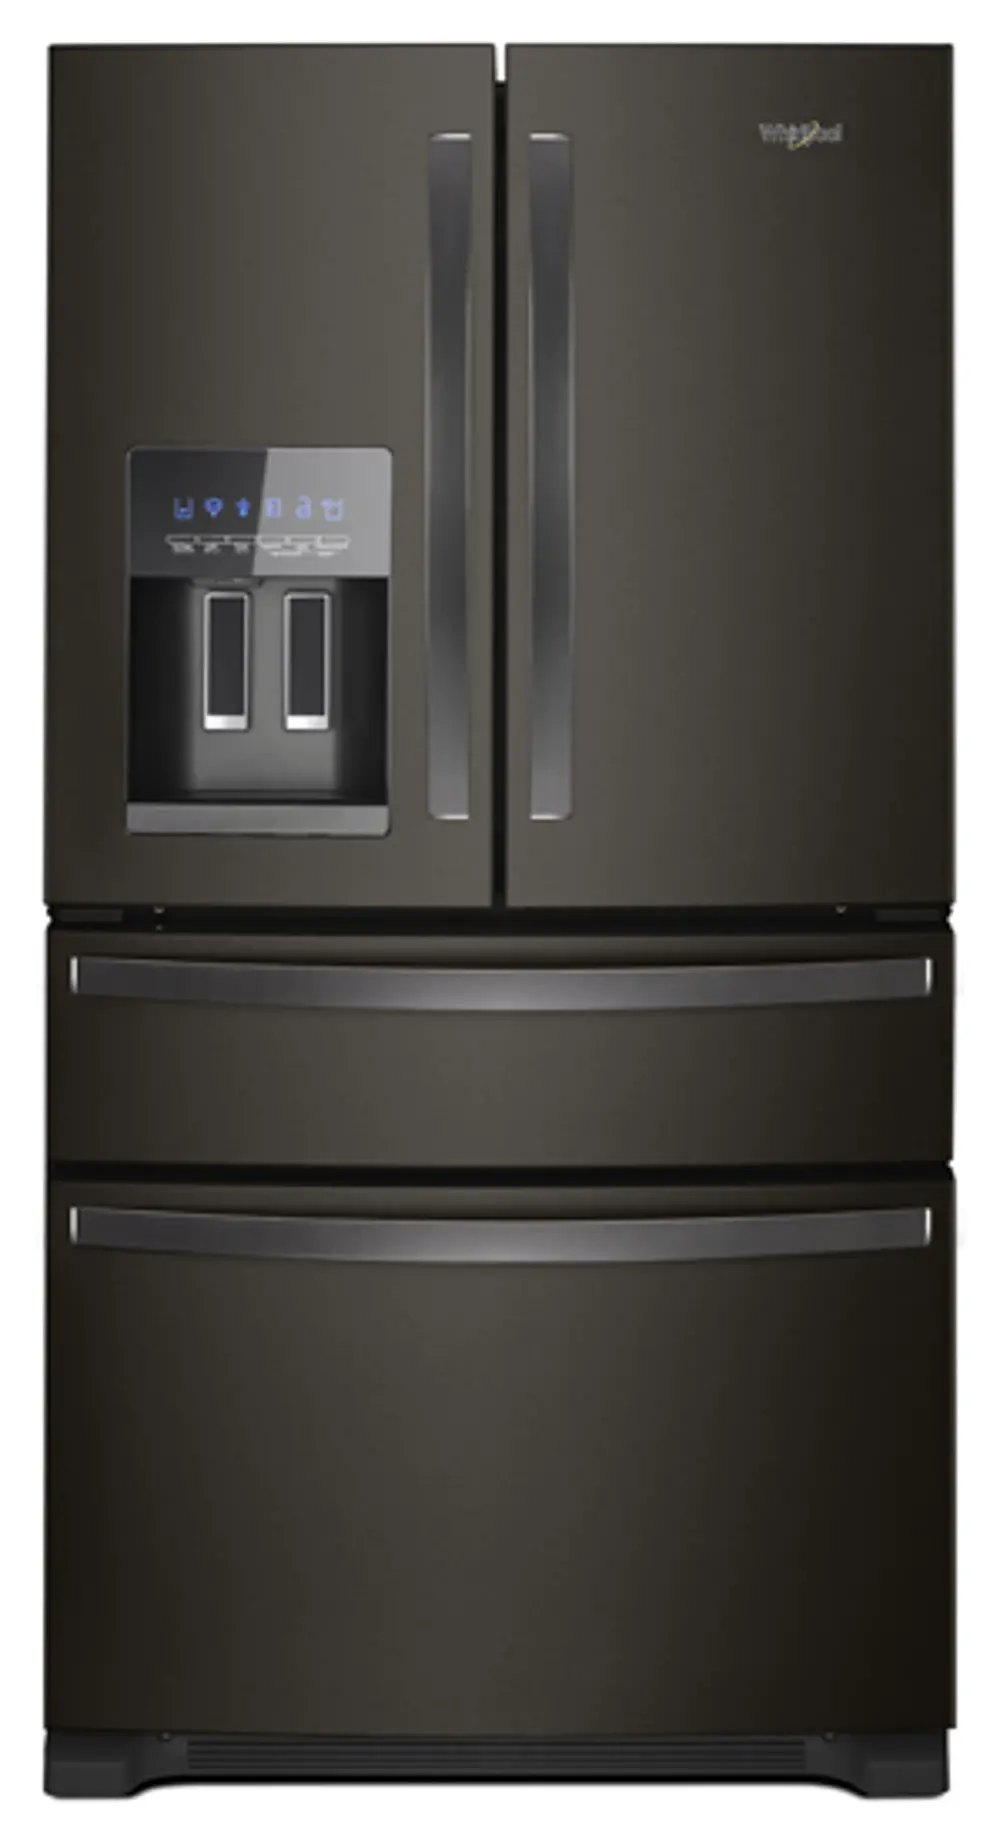 WRF974CIHV Whirlpool French Door Refrigerator - 36 Inch Black Stainless Steel Counter Depth-1